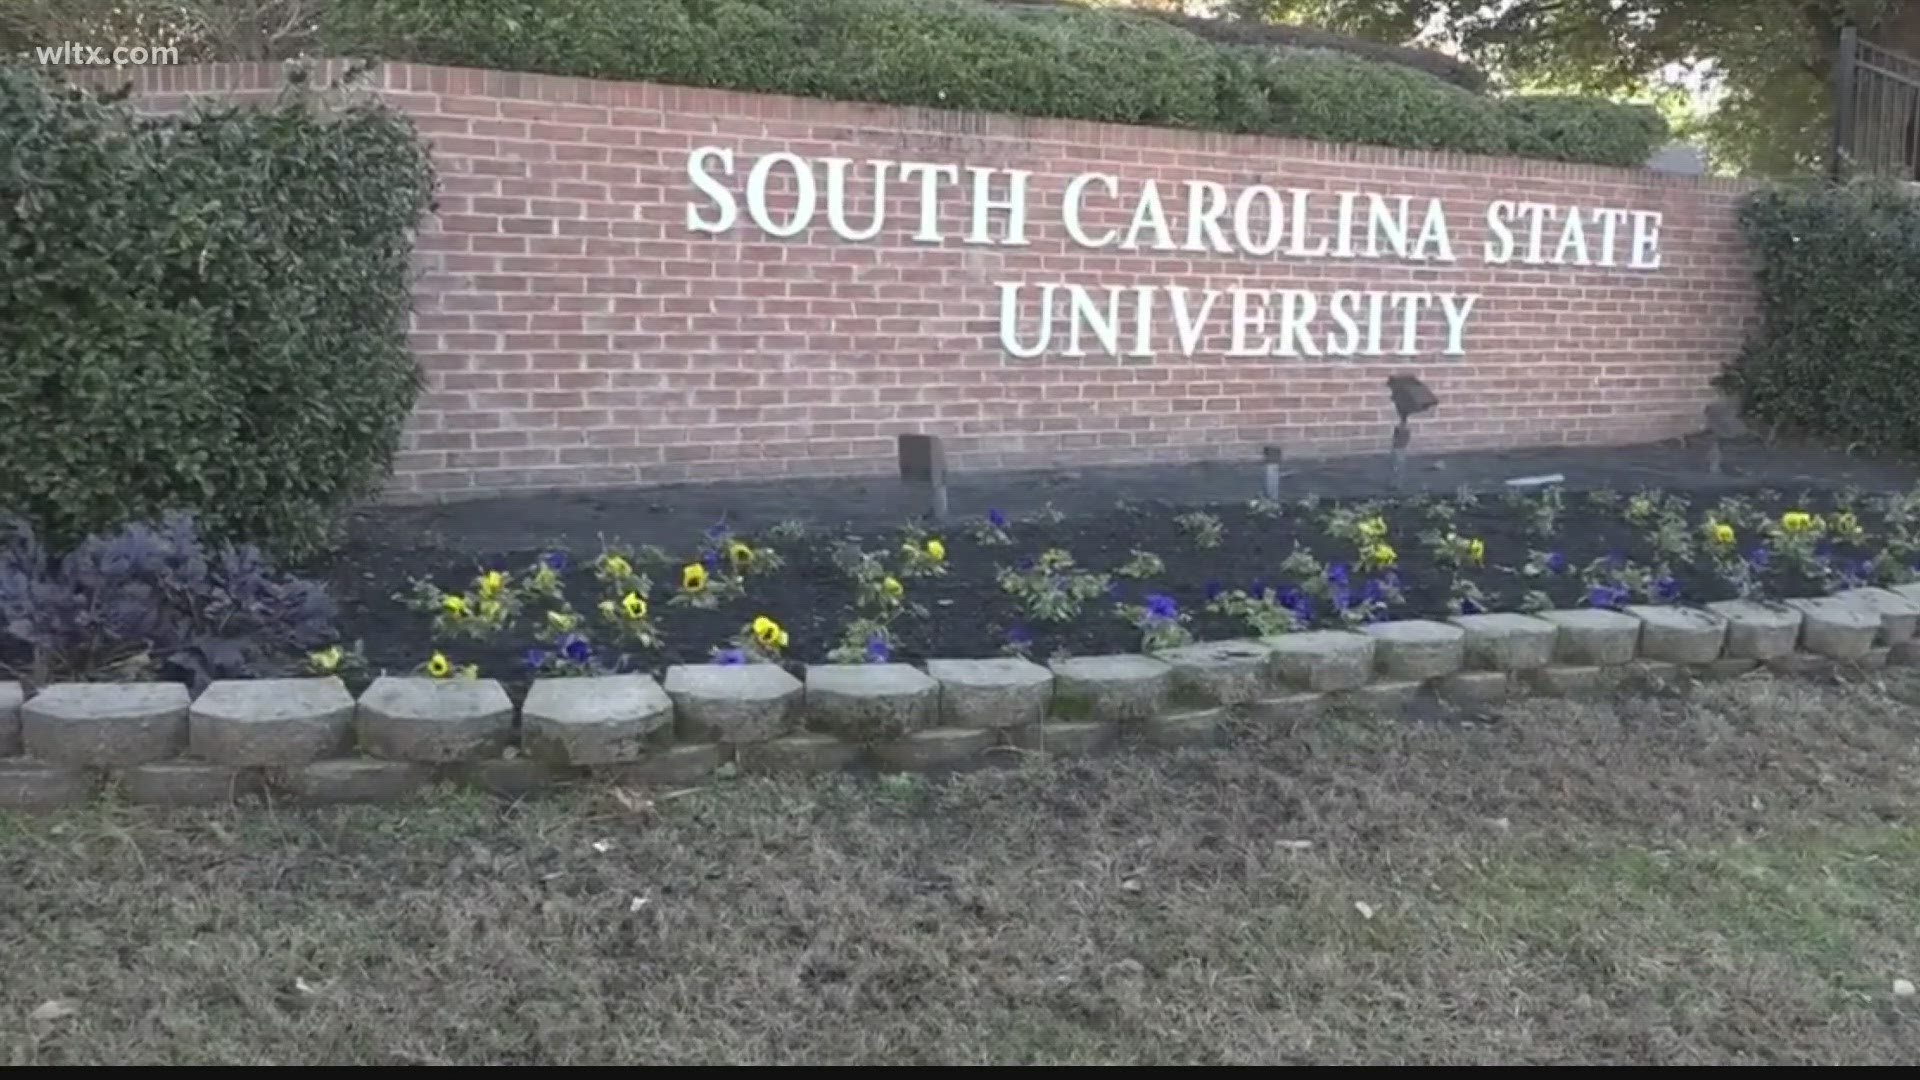 Here's a look at the upgrades students can expect to see at SC State University.